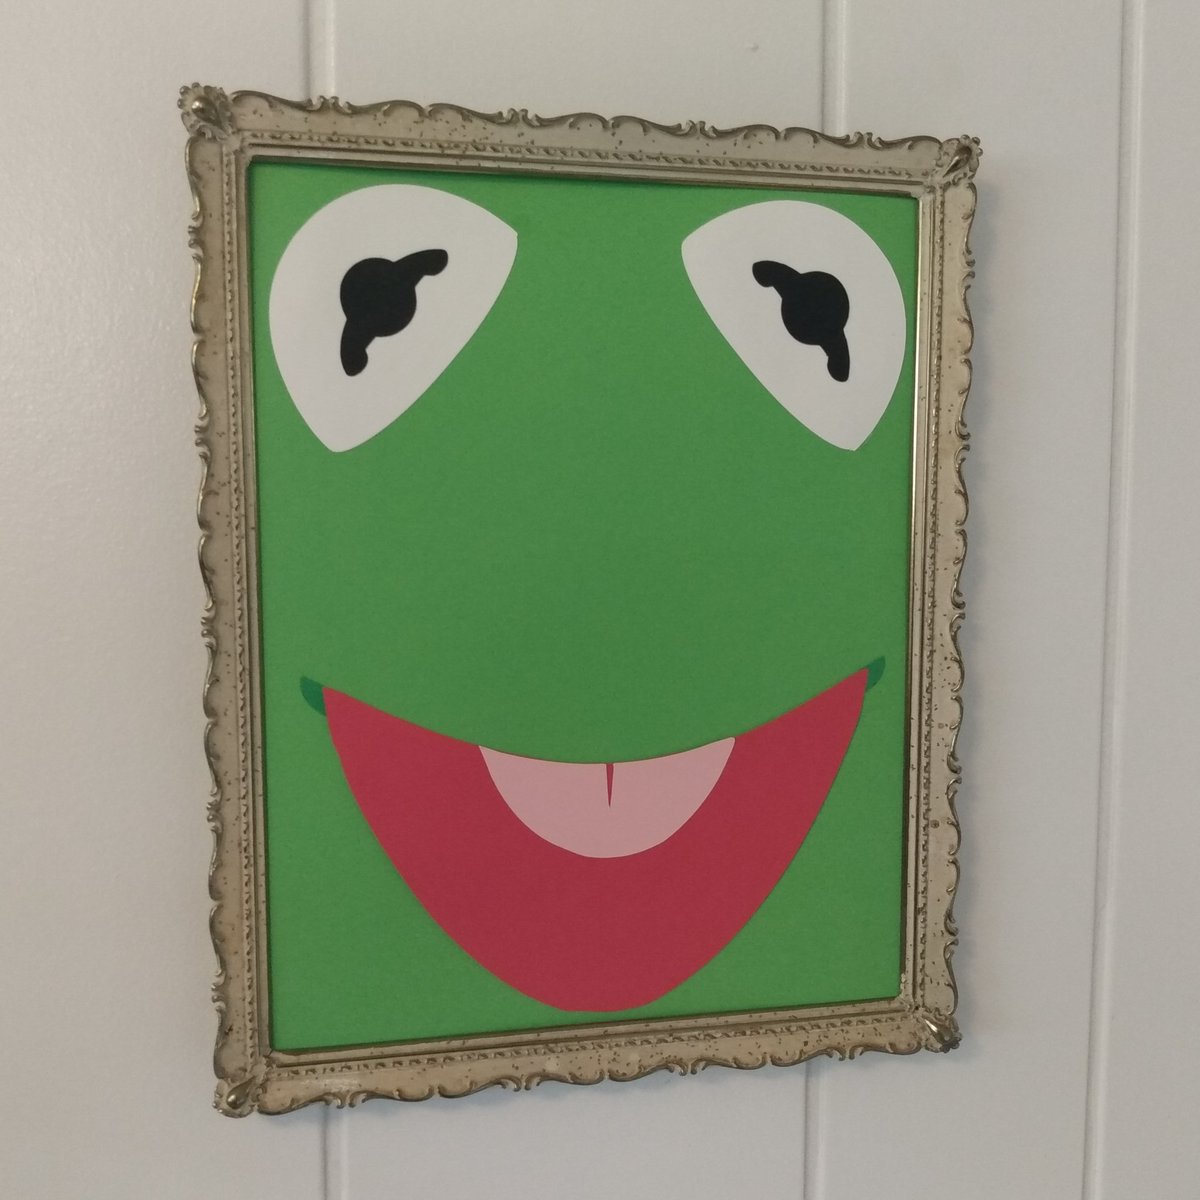 Hi -ho, Kermit The Frog not really print hear. Reporting that if your room needs a touch of colour this is it!

Limited run of 5.

#sesamestreet #muppets #themuppets #themuppetshow #kermitthefrog #kermit #artprint #papercrafts #papercraft #handmade #handmadeart #cubedudes